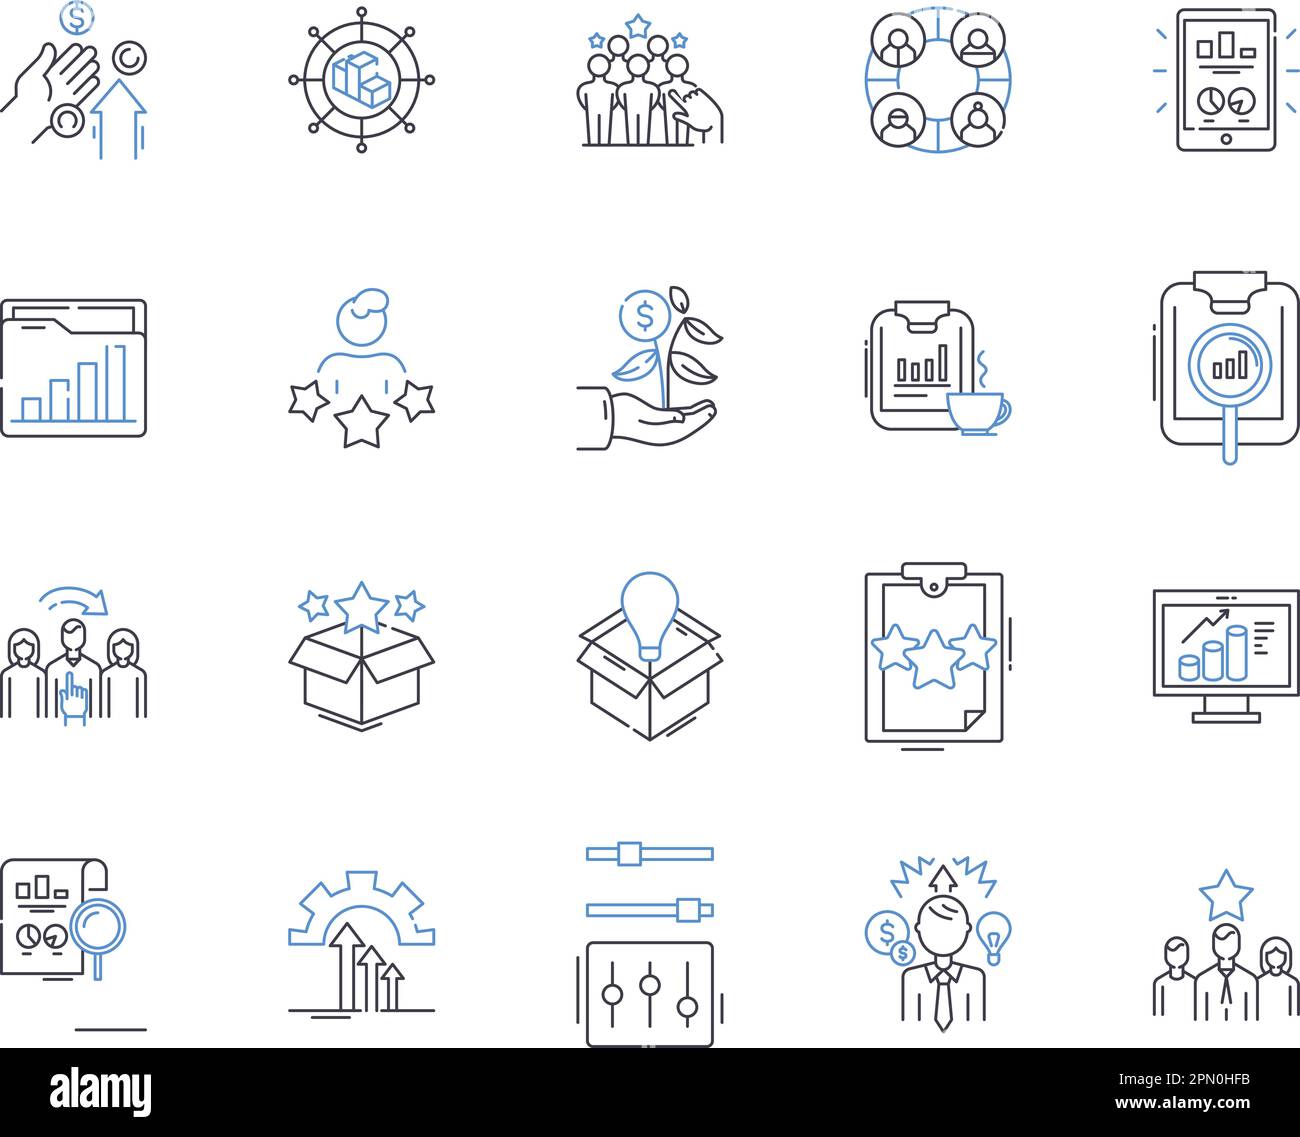 Business evaluation outline icons collection. Business, Evaluation, Rating, Analysis, Assess, Measure, Investigate vector and illustration concept set Stock Vector